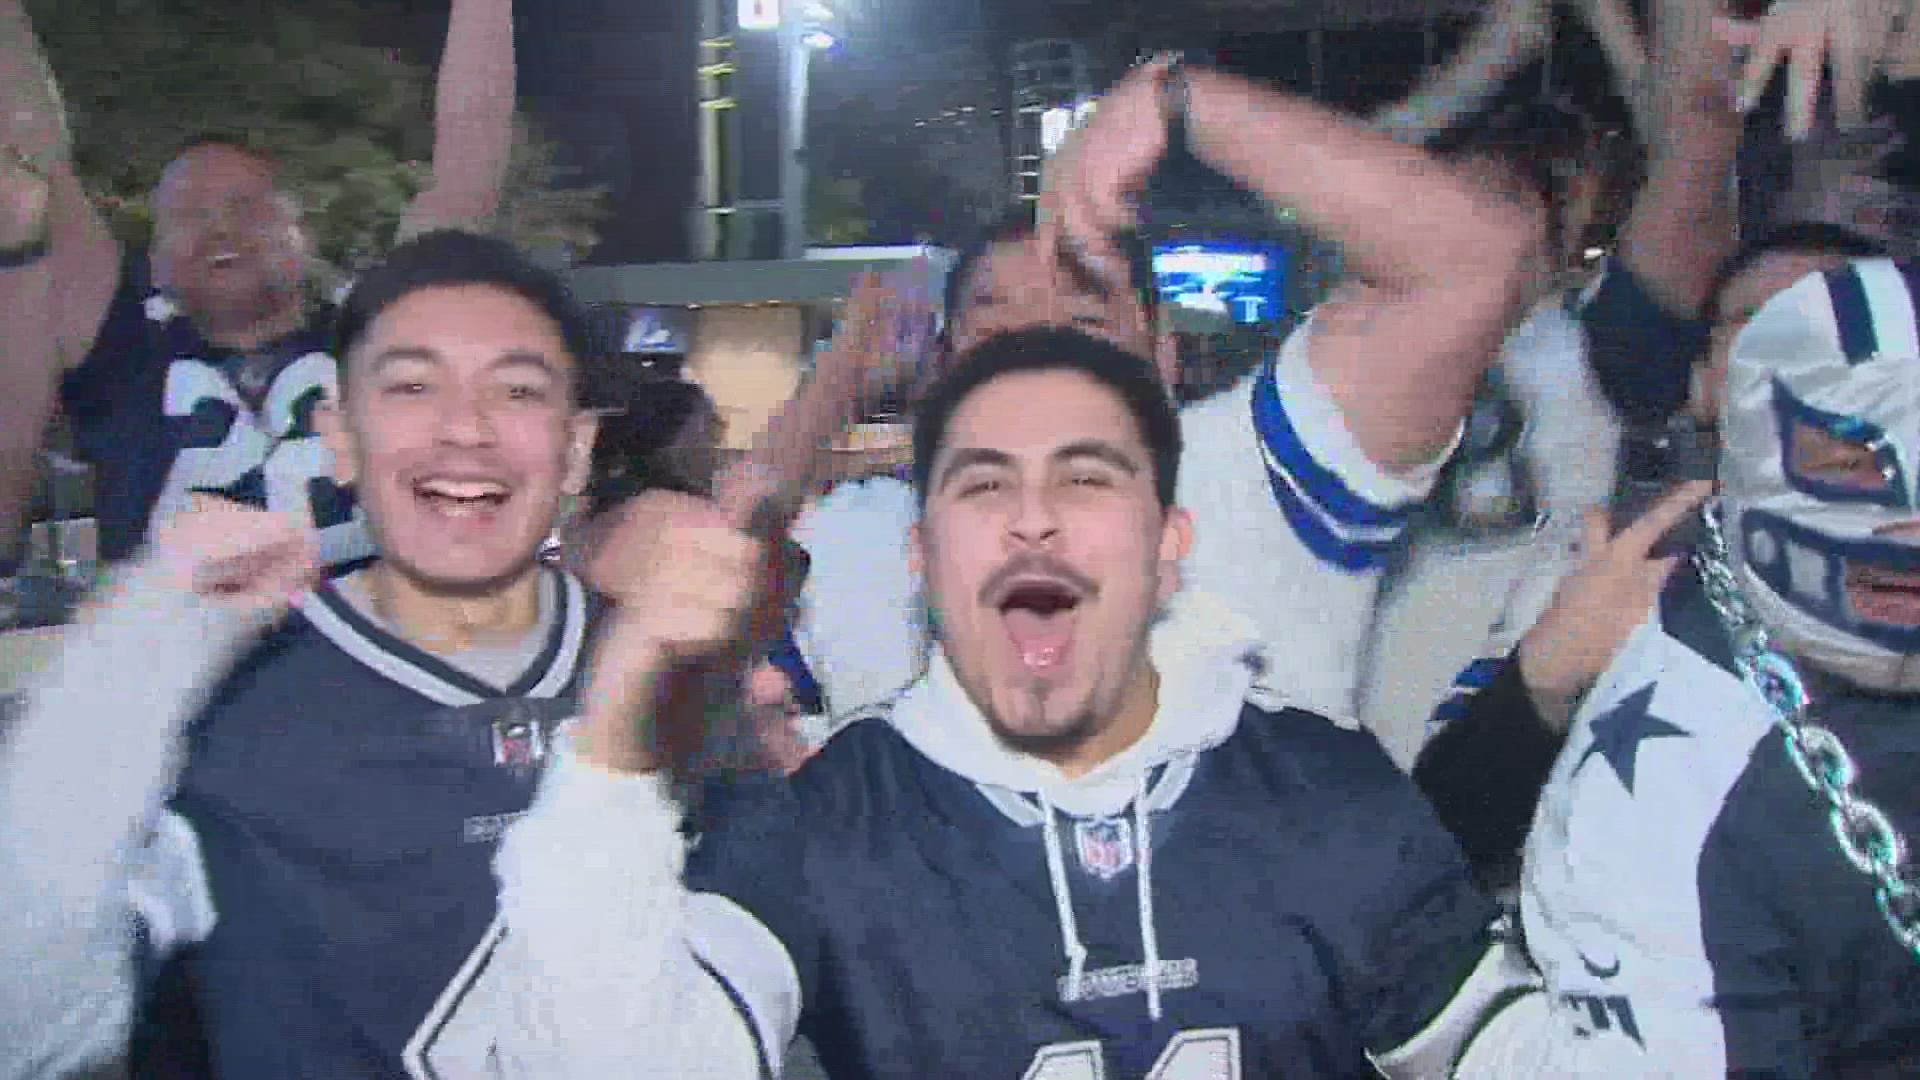 More than 10,000 fans showed up to watch the Cowboys outside AT&T Stadium Monday night.